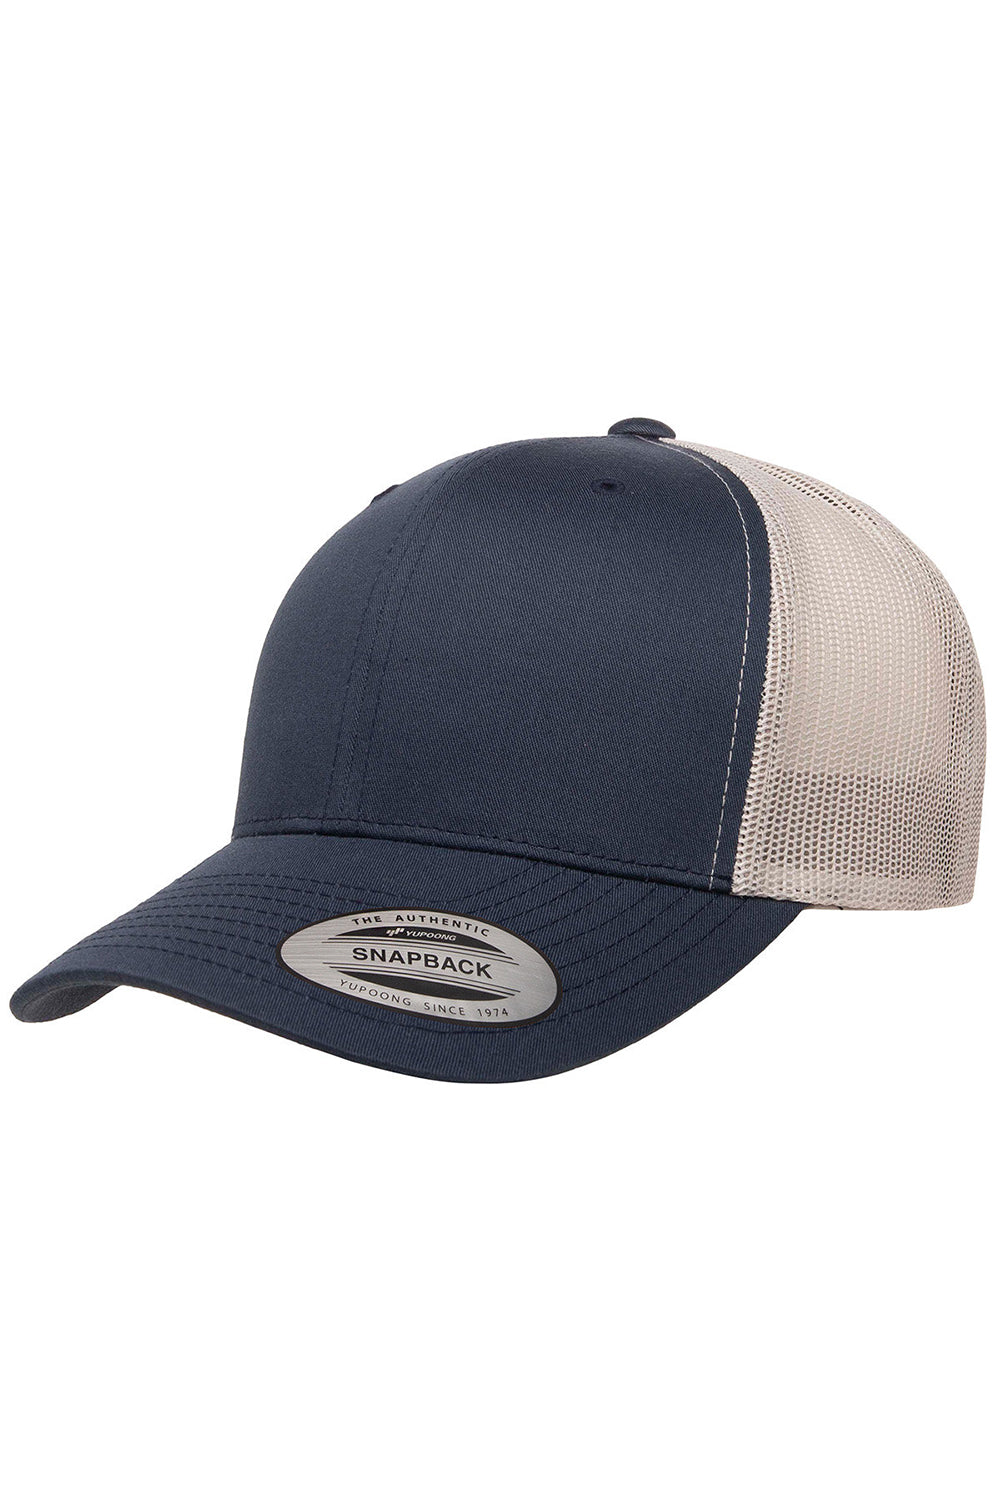 Yupoong 6606 Mens Adjustable Trucker Hat Navy Blue/Silver Grey Front